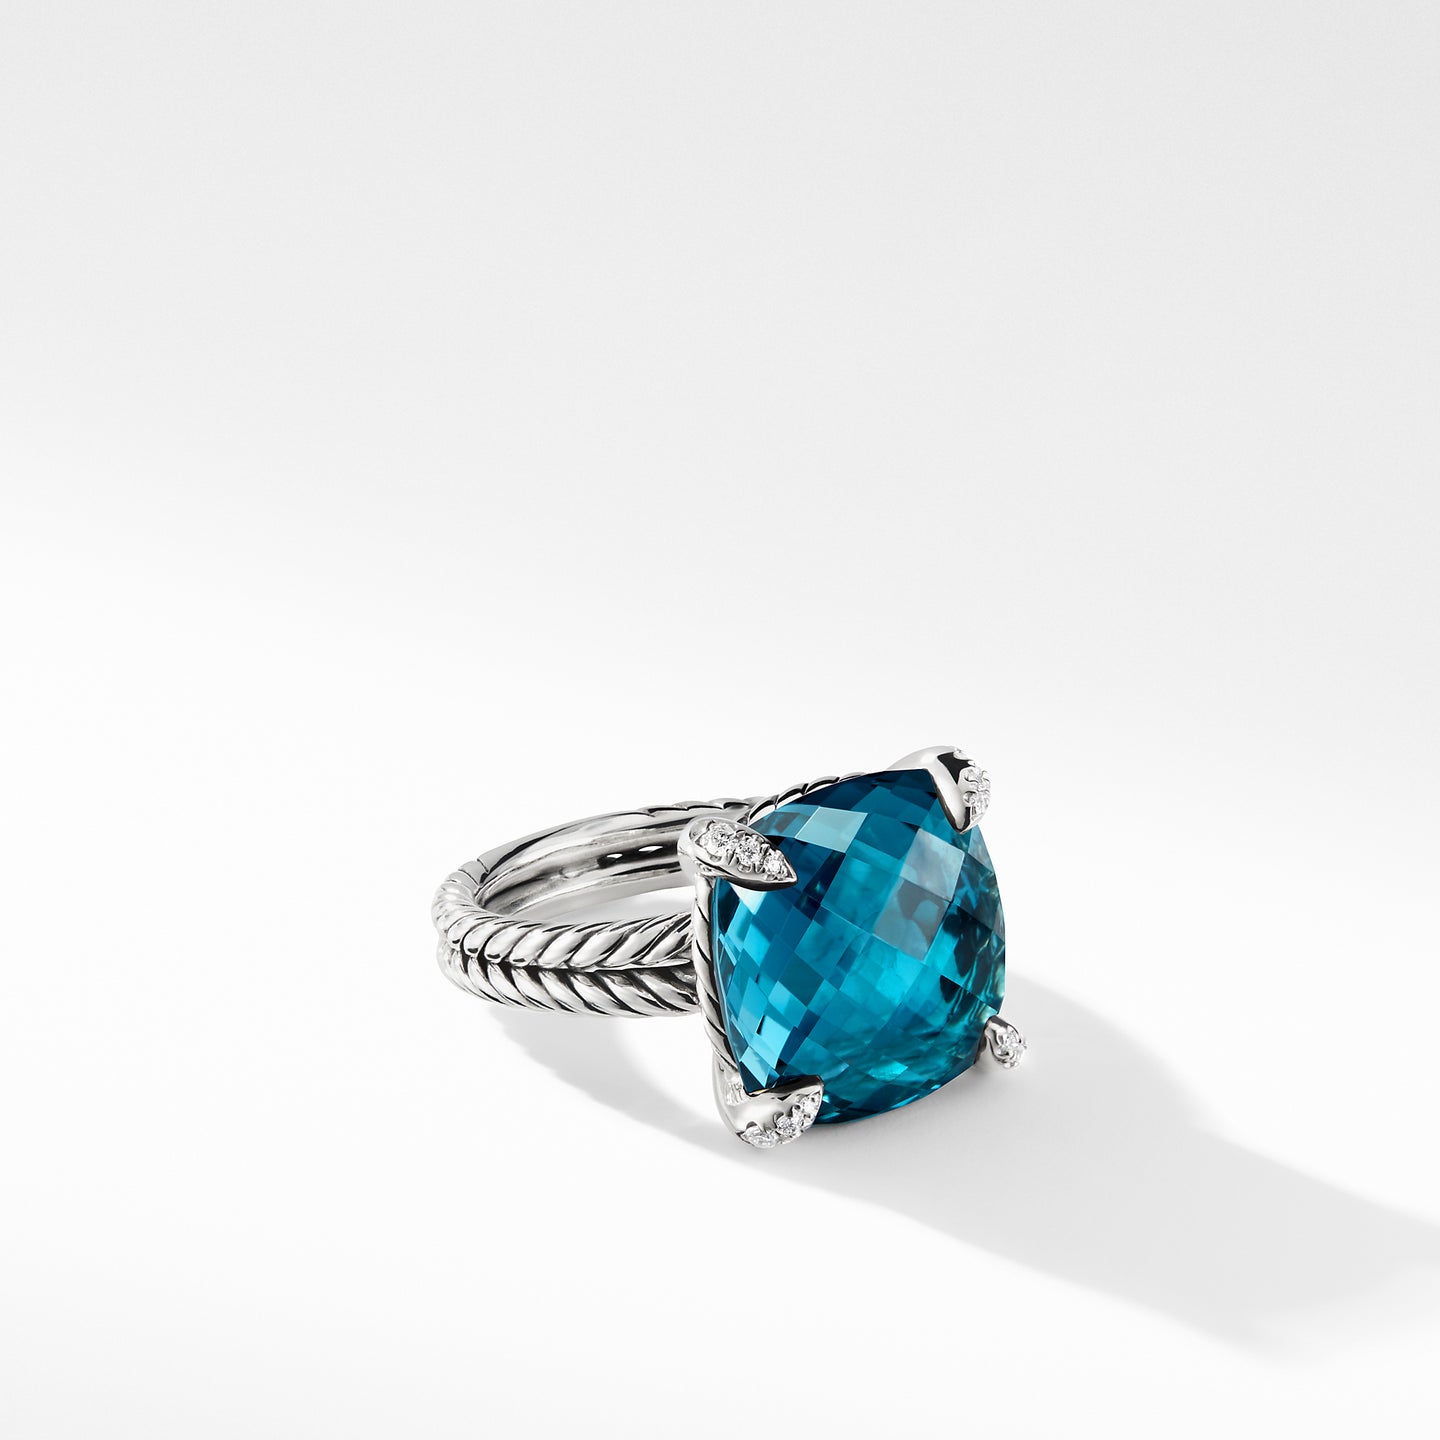 Ring with Hampton Blue Topaz and Diamonds, Size 7